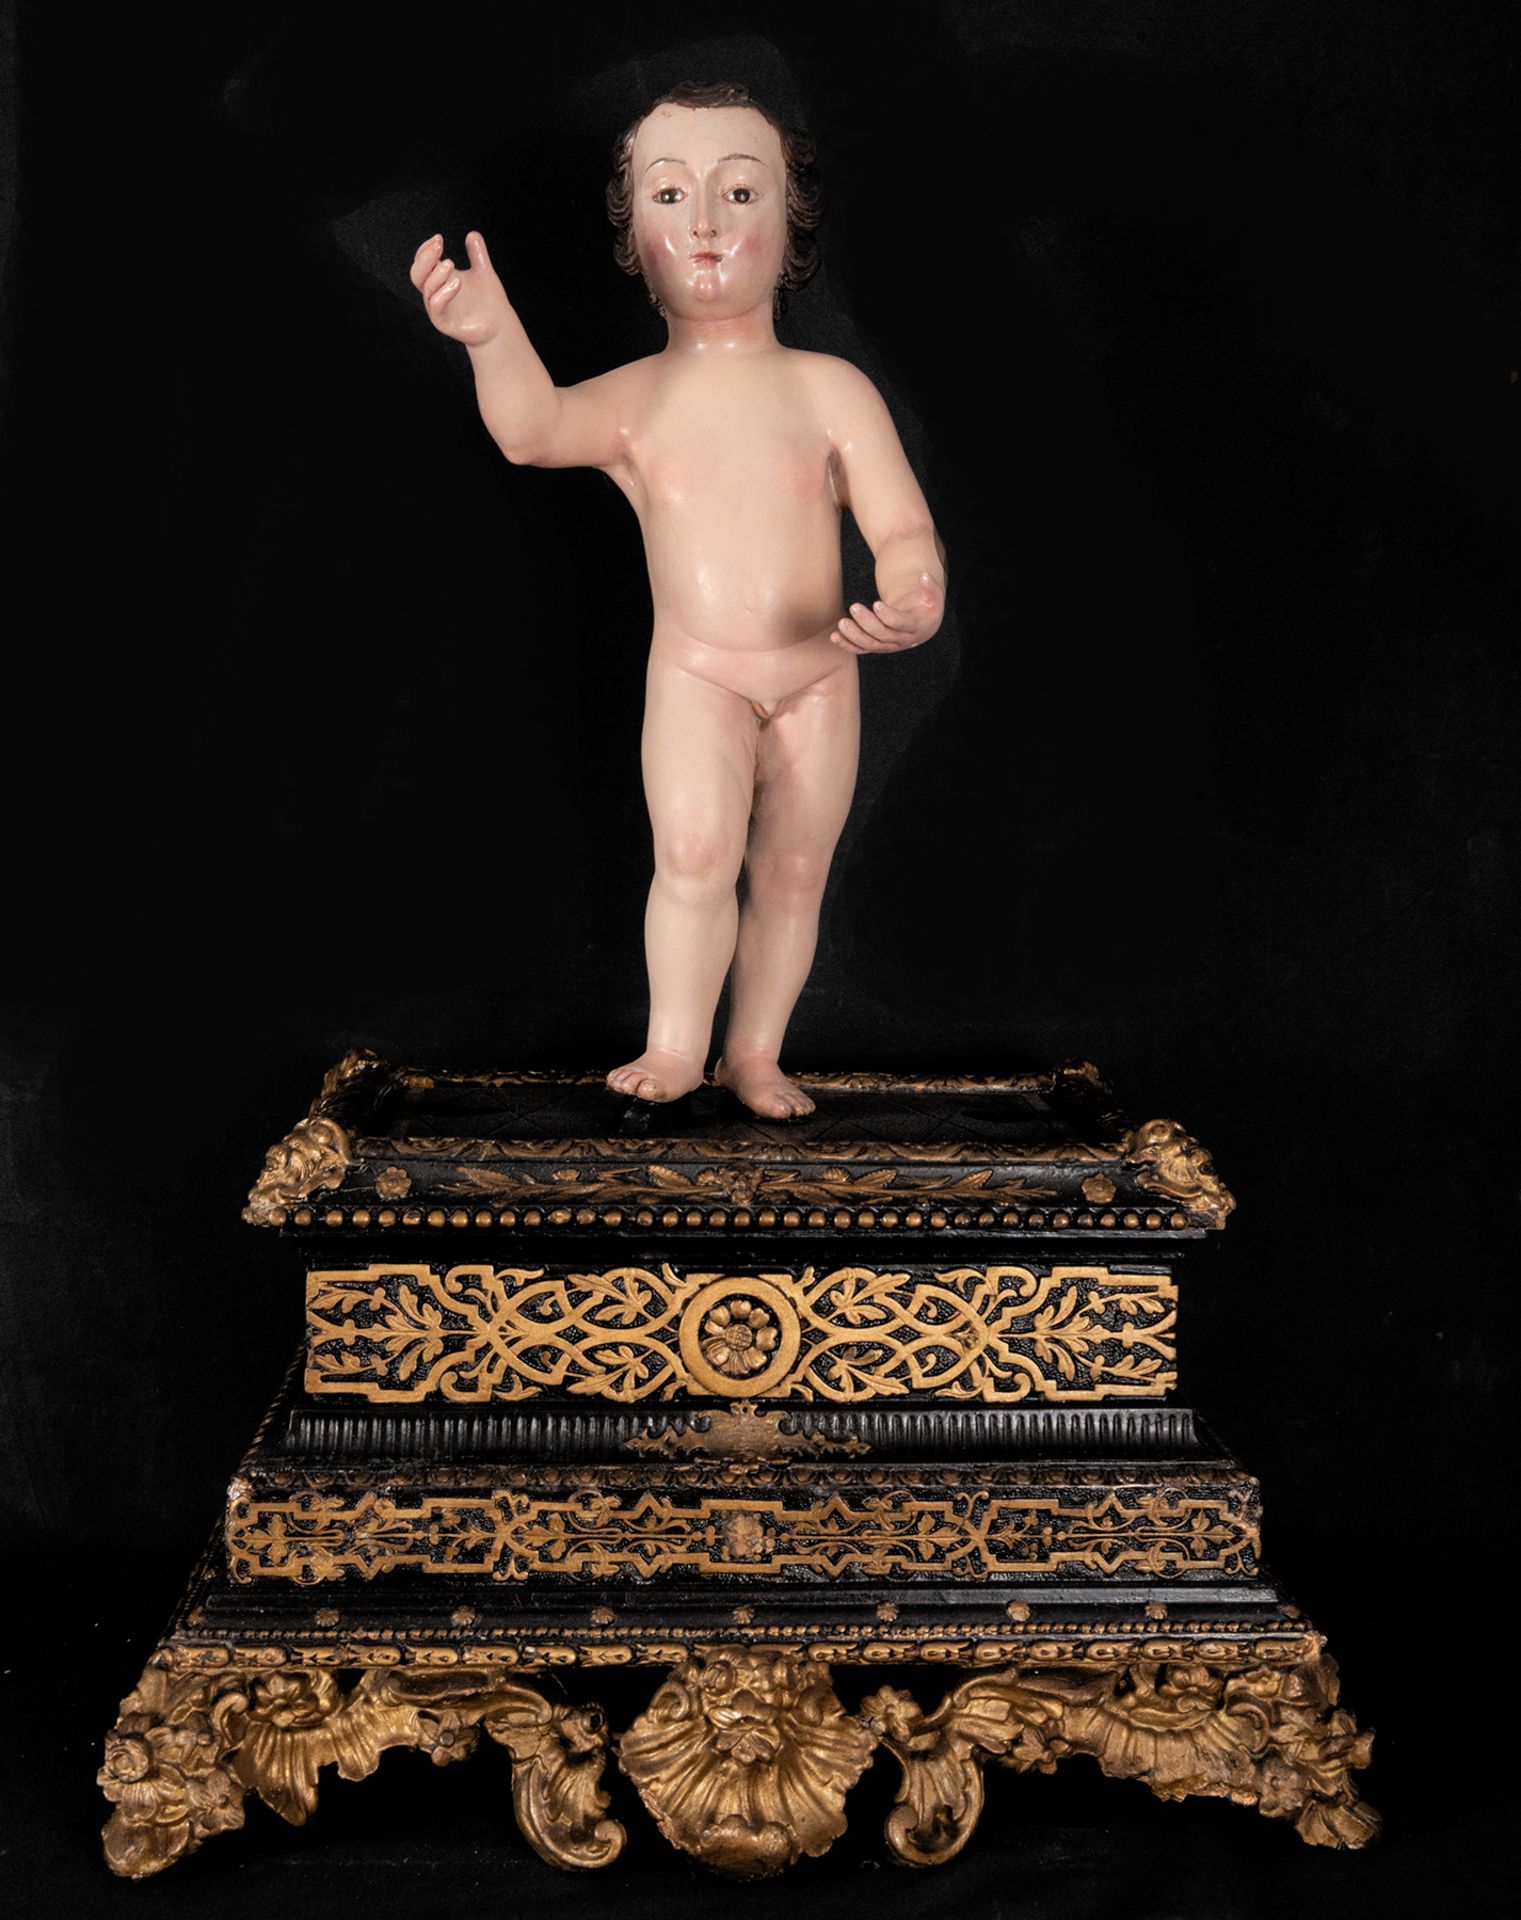 Child Jesus with important base, the Child 18th century, the 19th century base